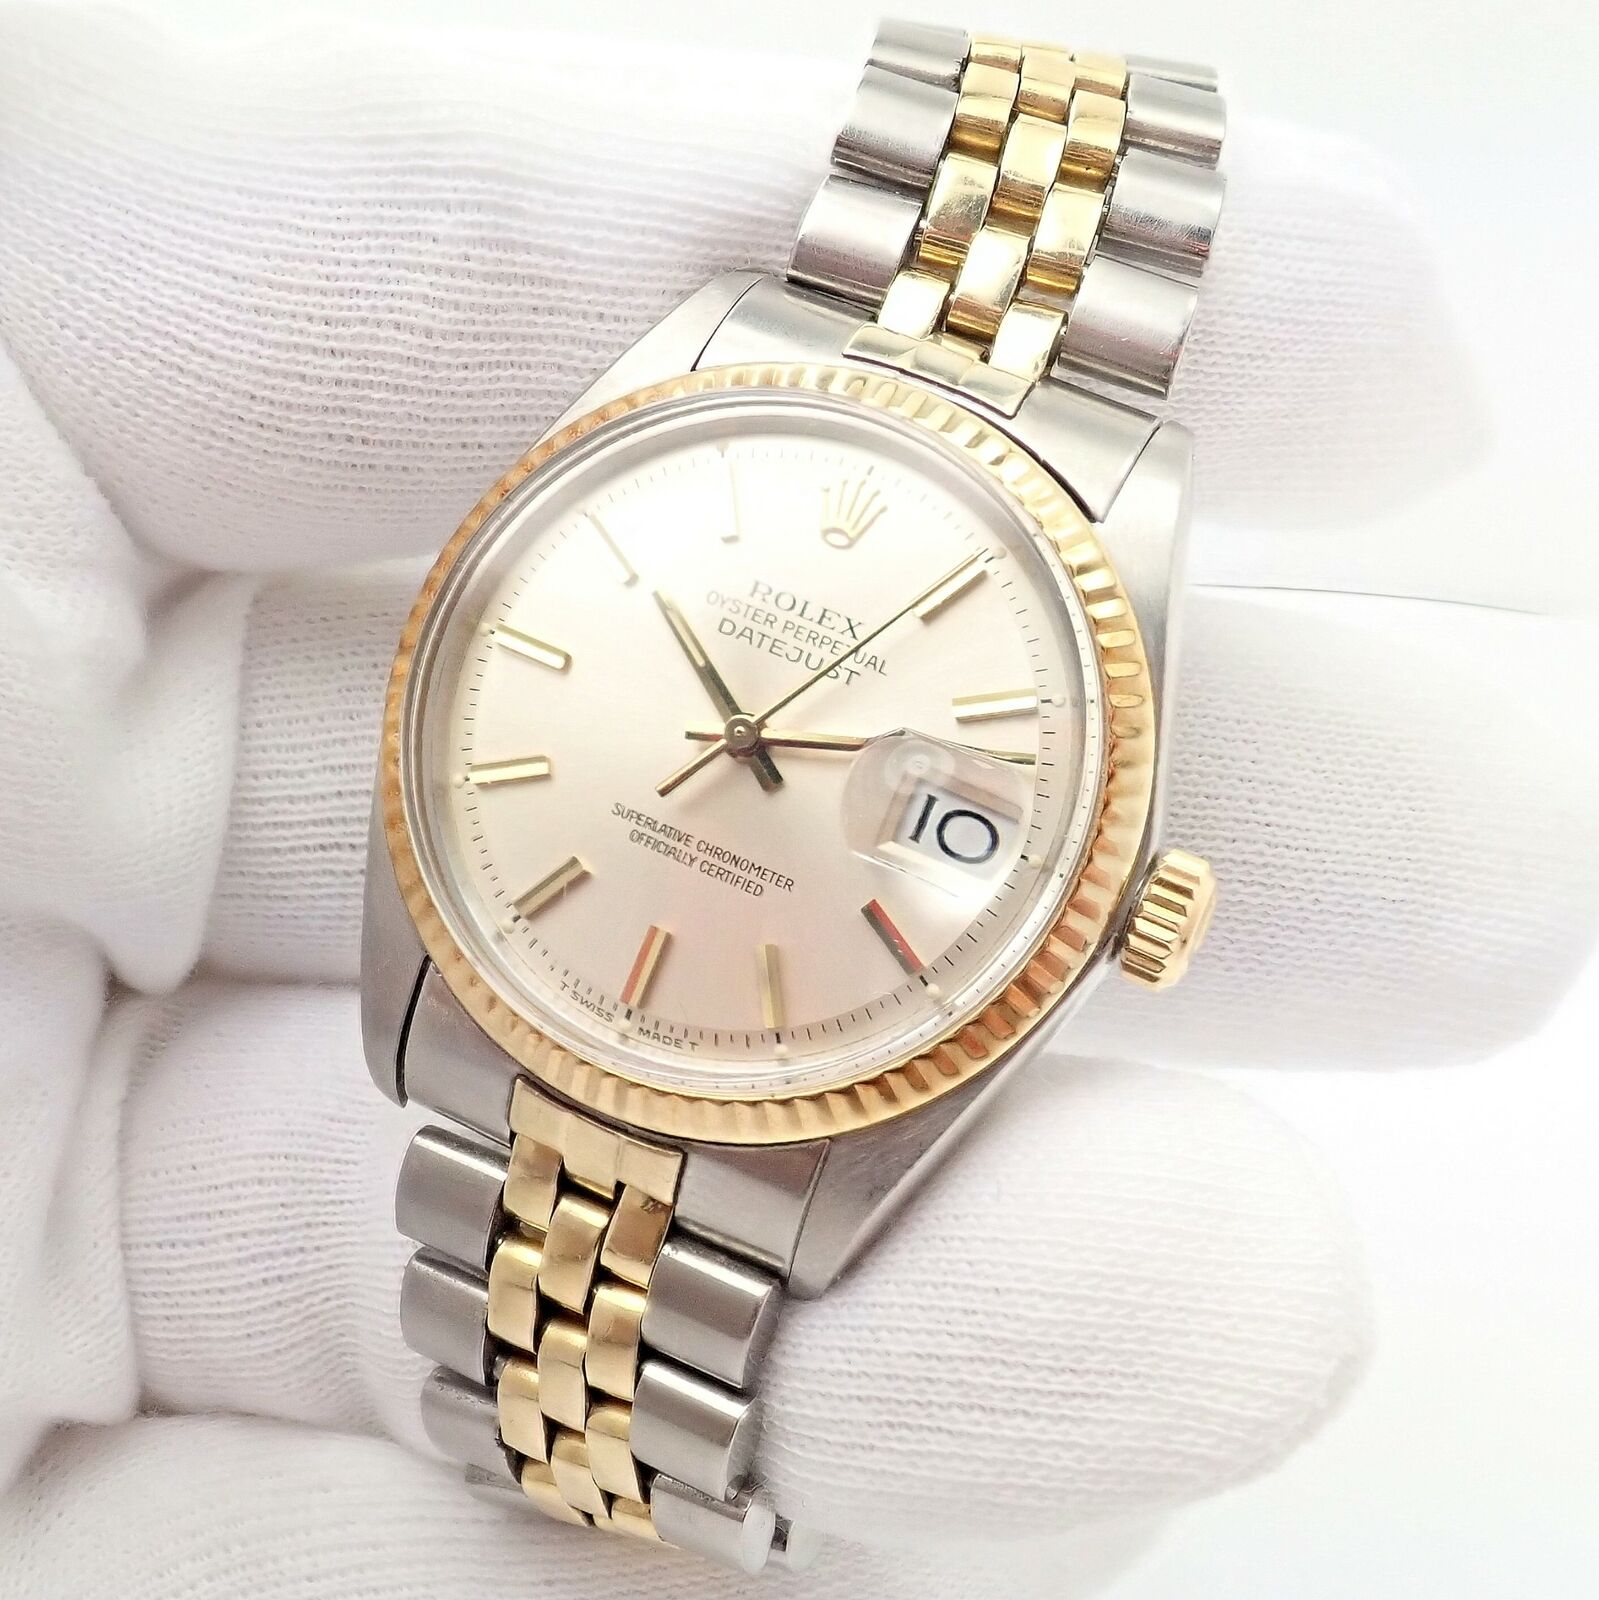 Rolex Jewelry & Watches:Watches, Parts & Accessories:Watches:Wristwatches Rolex DateJust 18k Gold + Steel Mens Automatic Jubilee Fluted Bezel Watch 1601